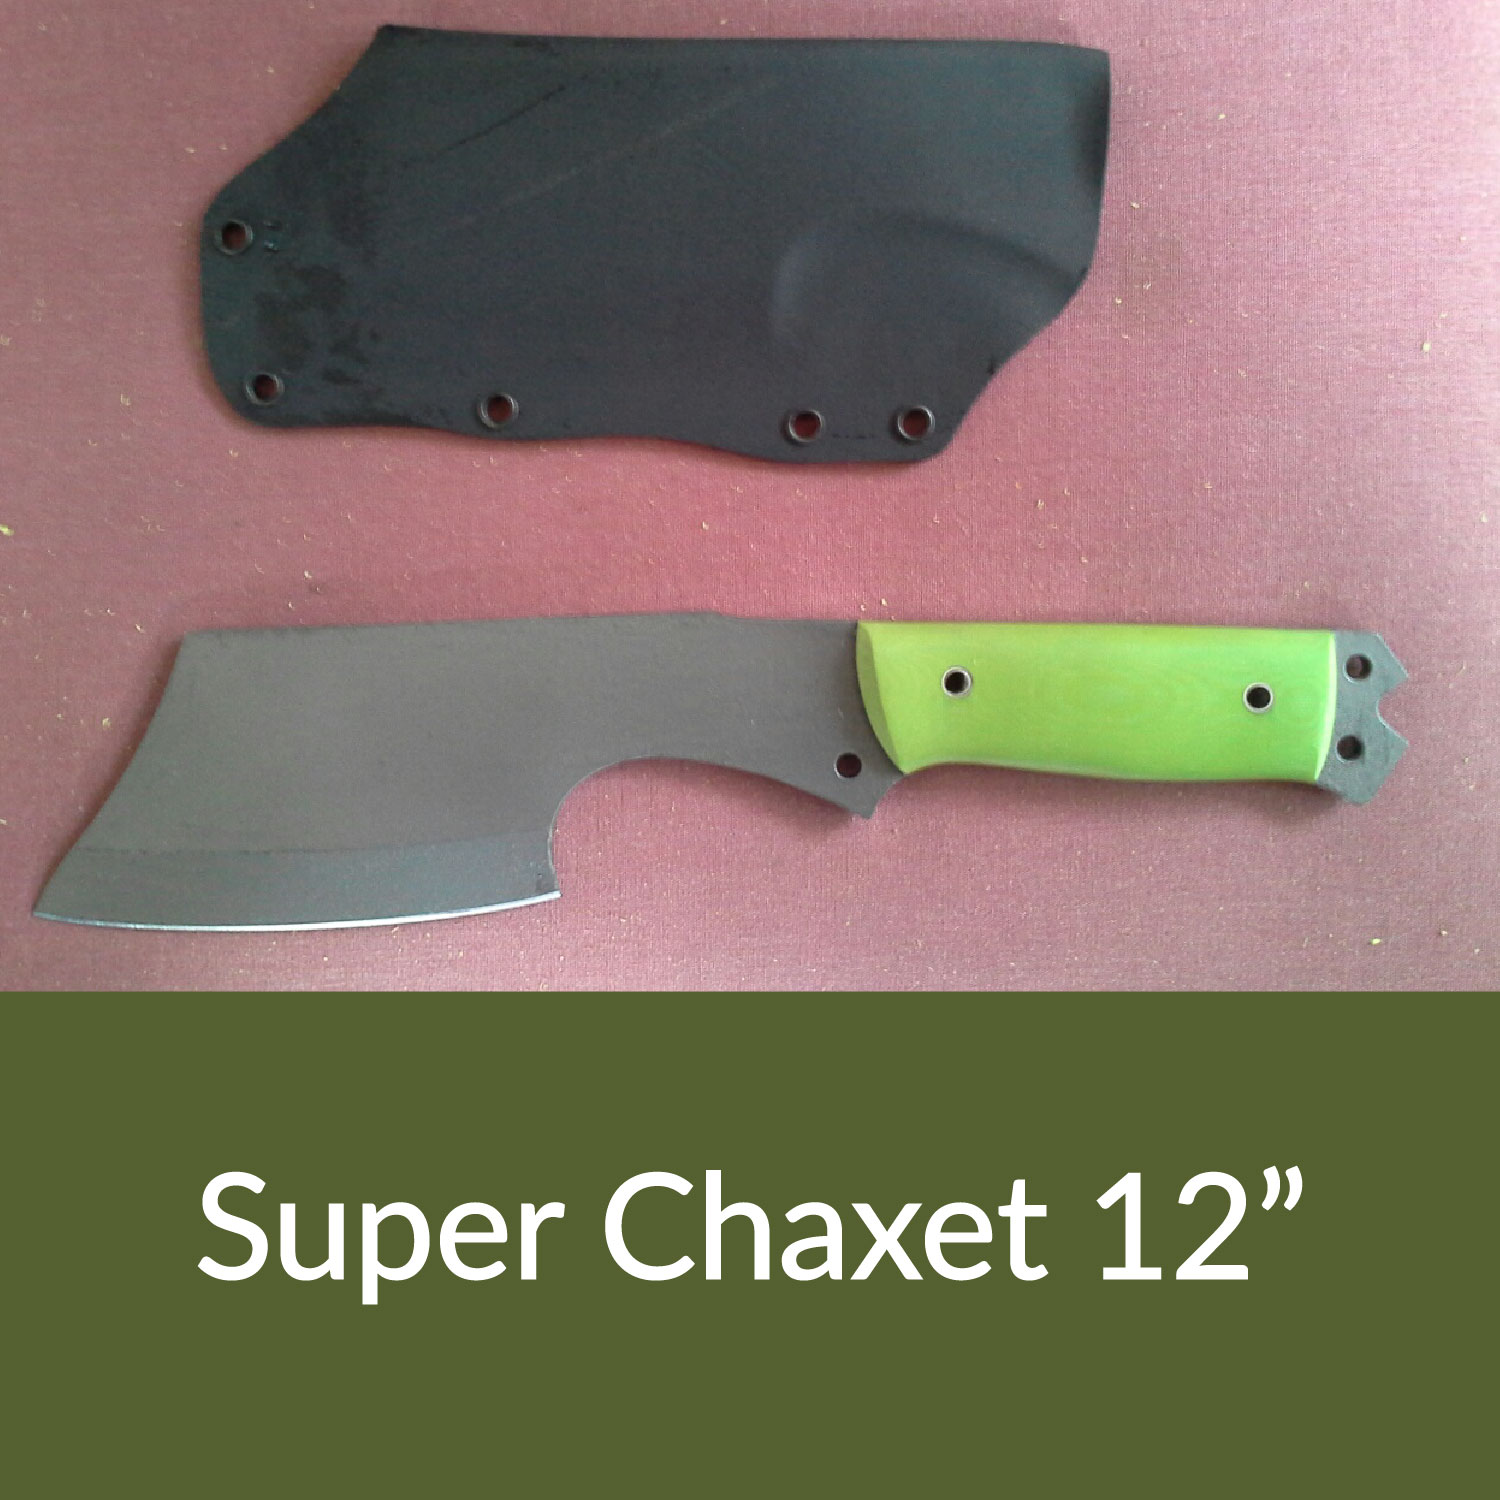 The Super Chaxet